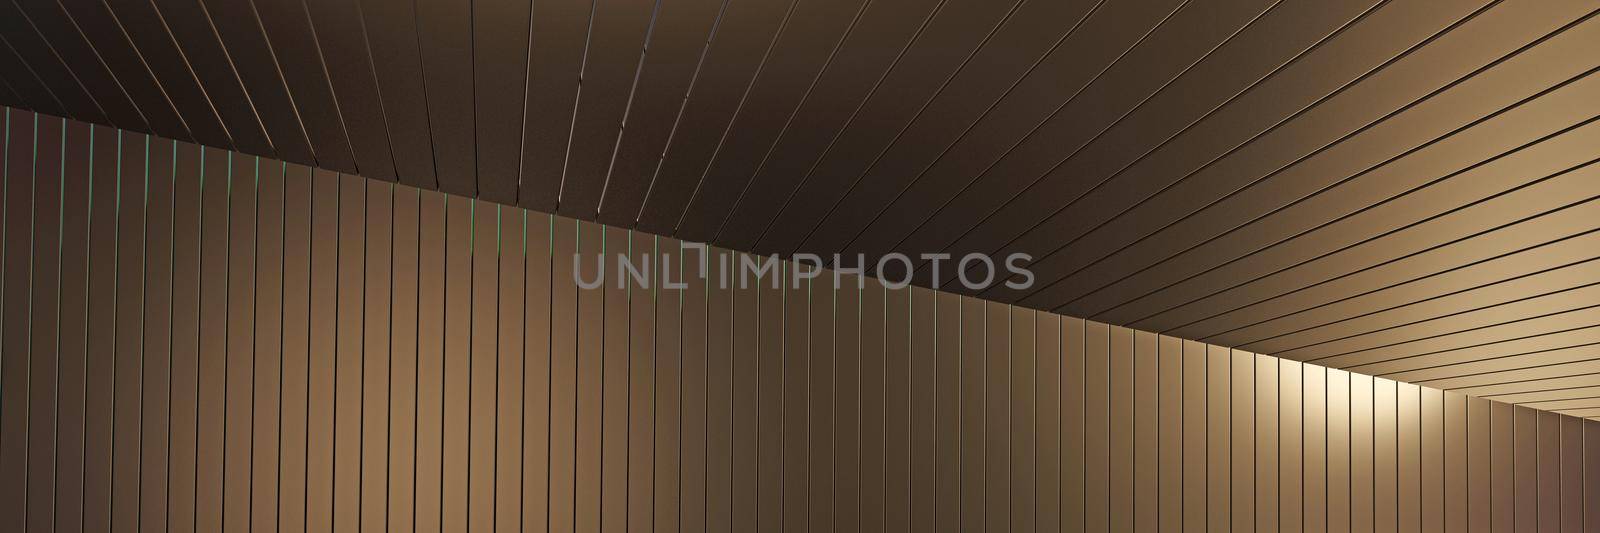 Grunge room with urban golden background. 3d rendering by Taut